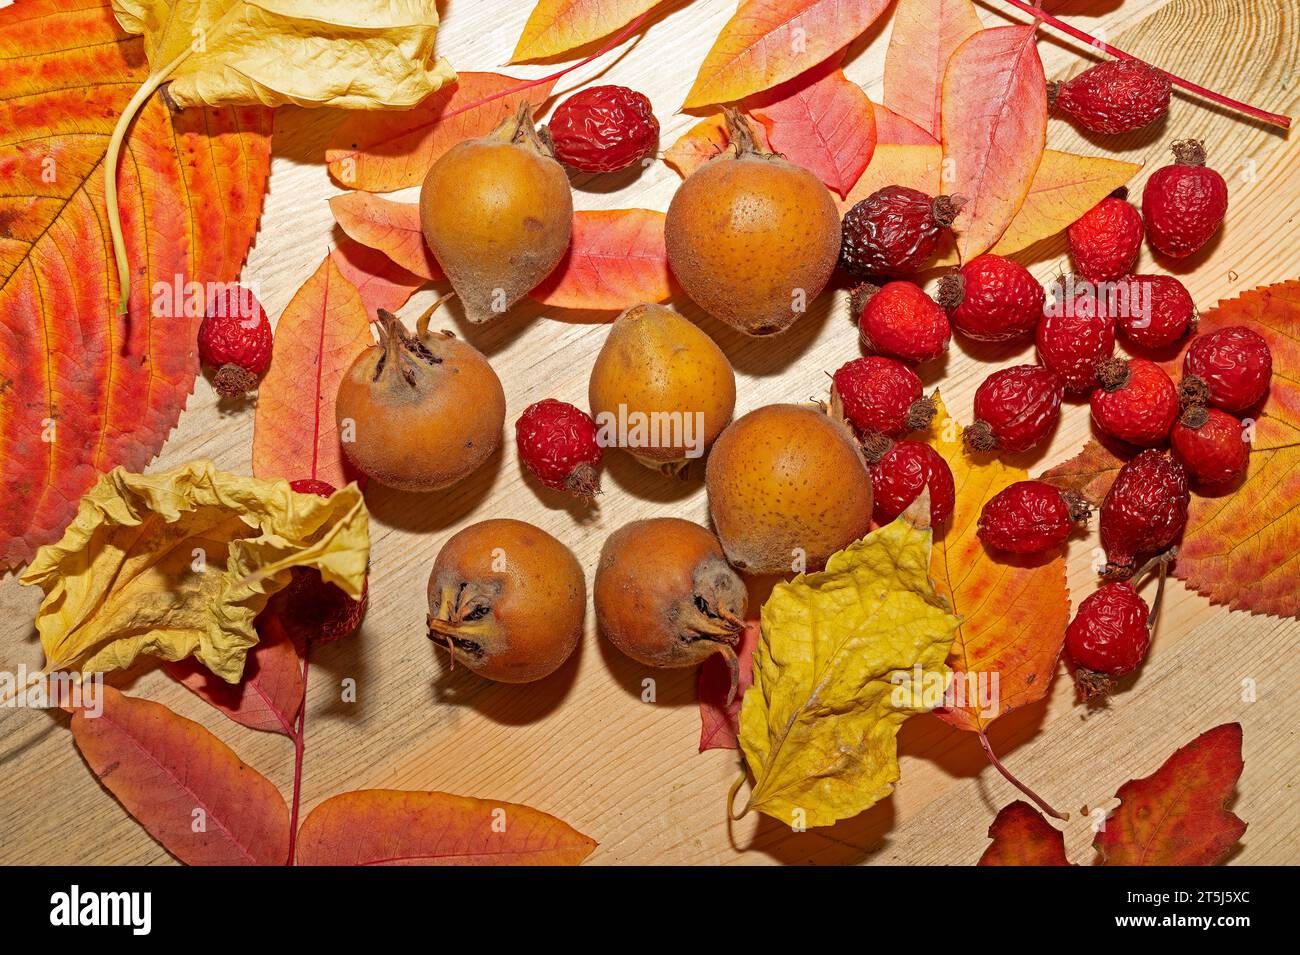 Fresh ripe organic medlar fruit and rose hips on wood and among autumn leaves. Healthy food Mespilus germanica and rose hips. Stock Photo